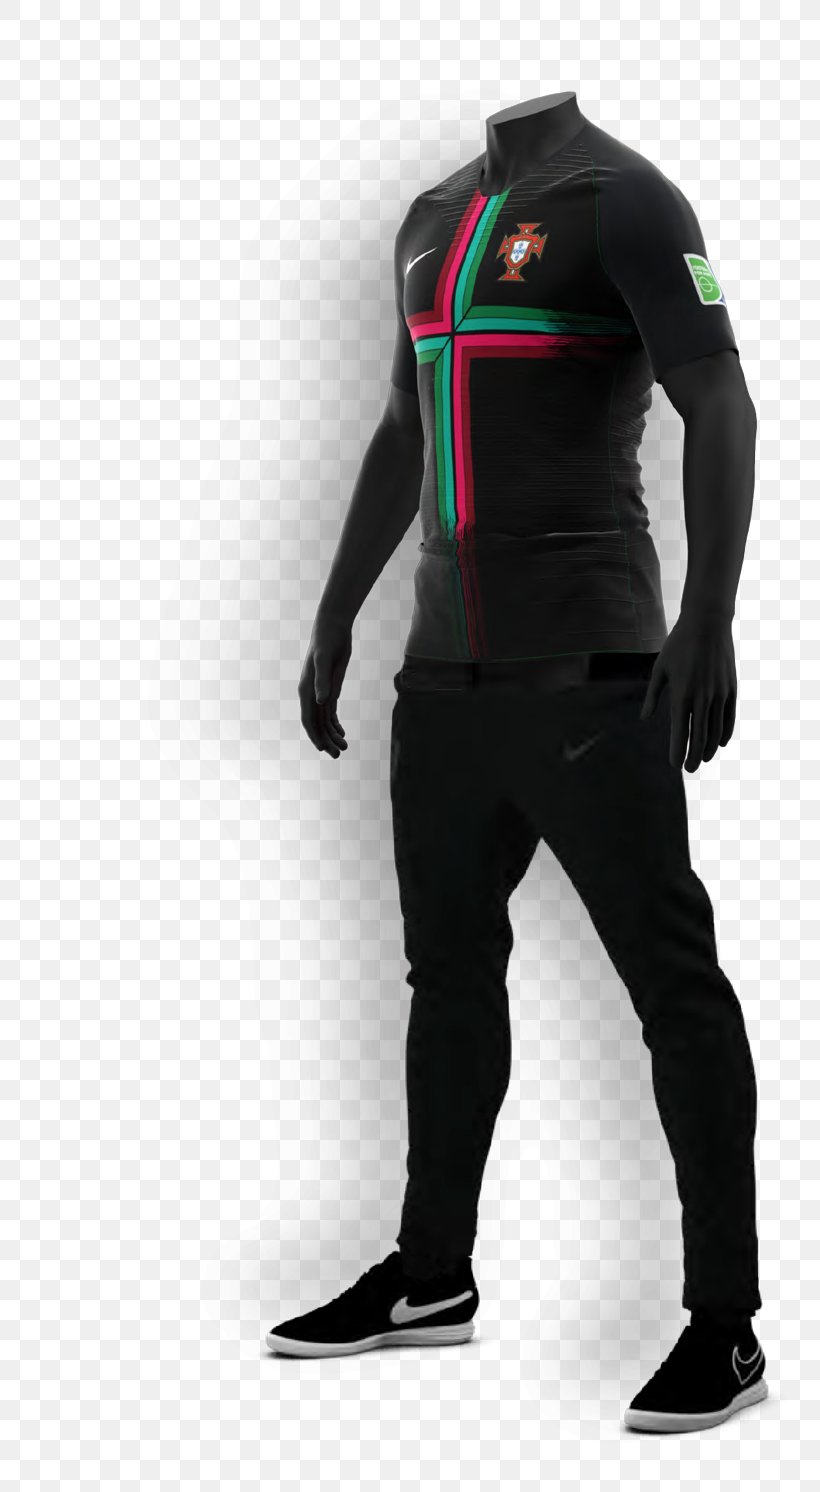 Wetsuit Shoulder Sleeve Sportswear, PNG, 762x1492px, Wetsuit, Joint, Personal Protective Equipment, Shoulder, Sleeve Download Free